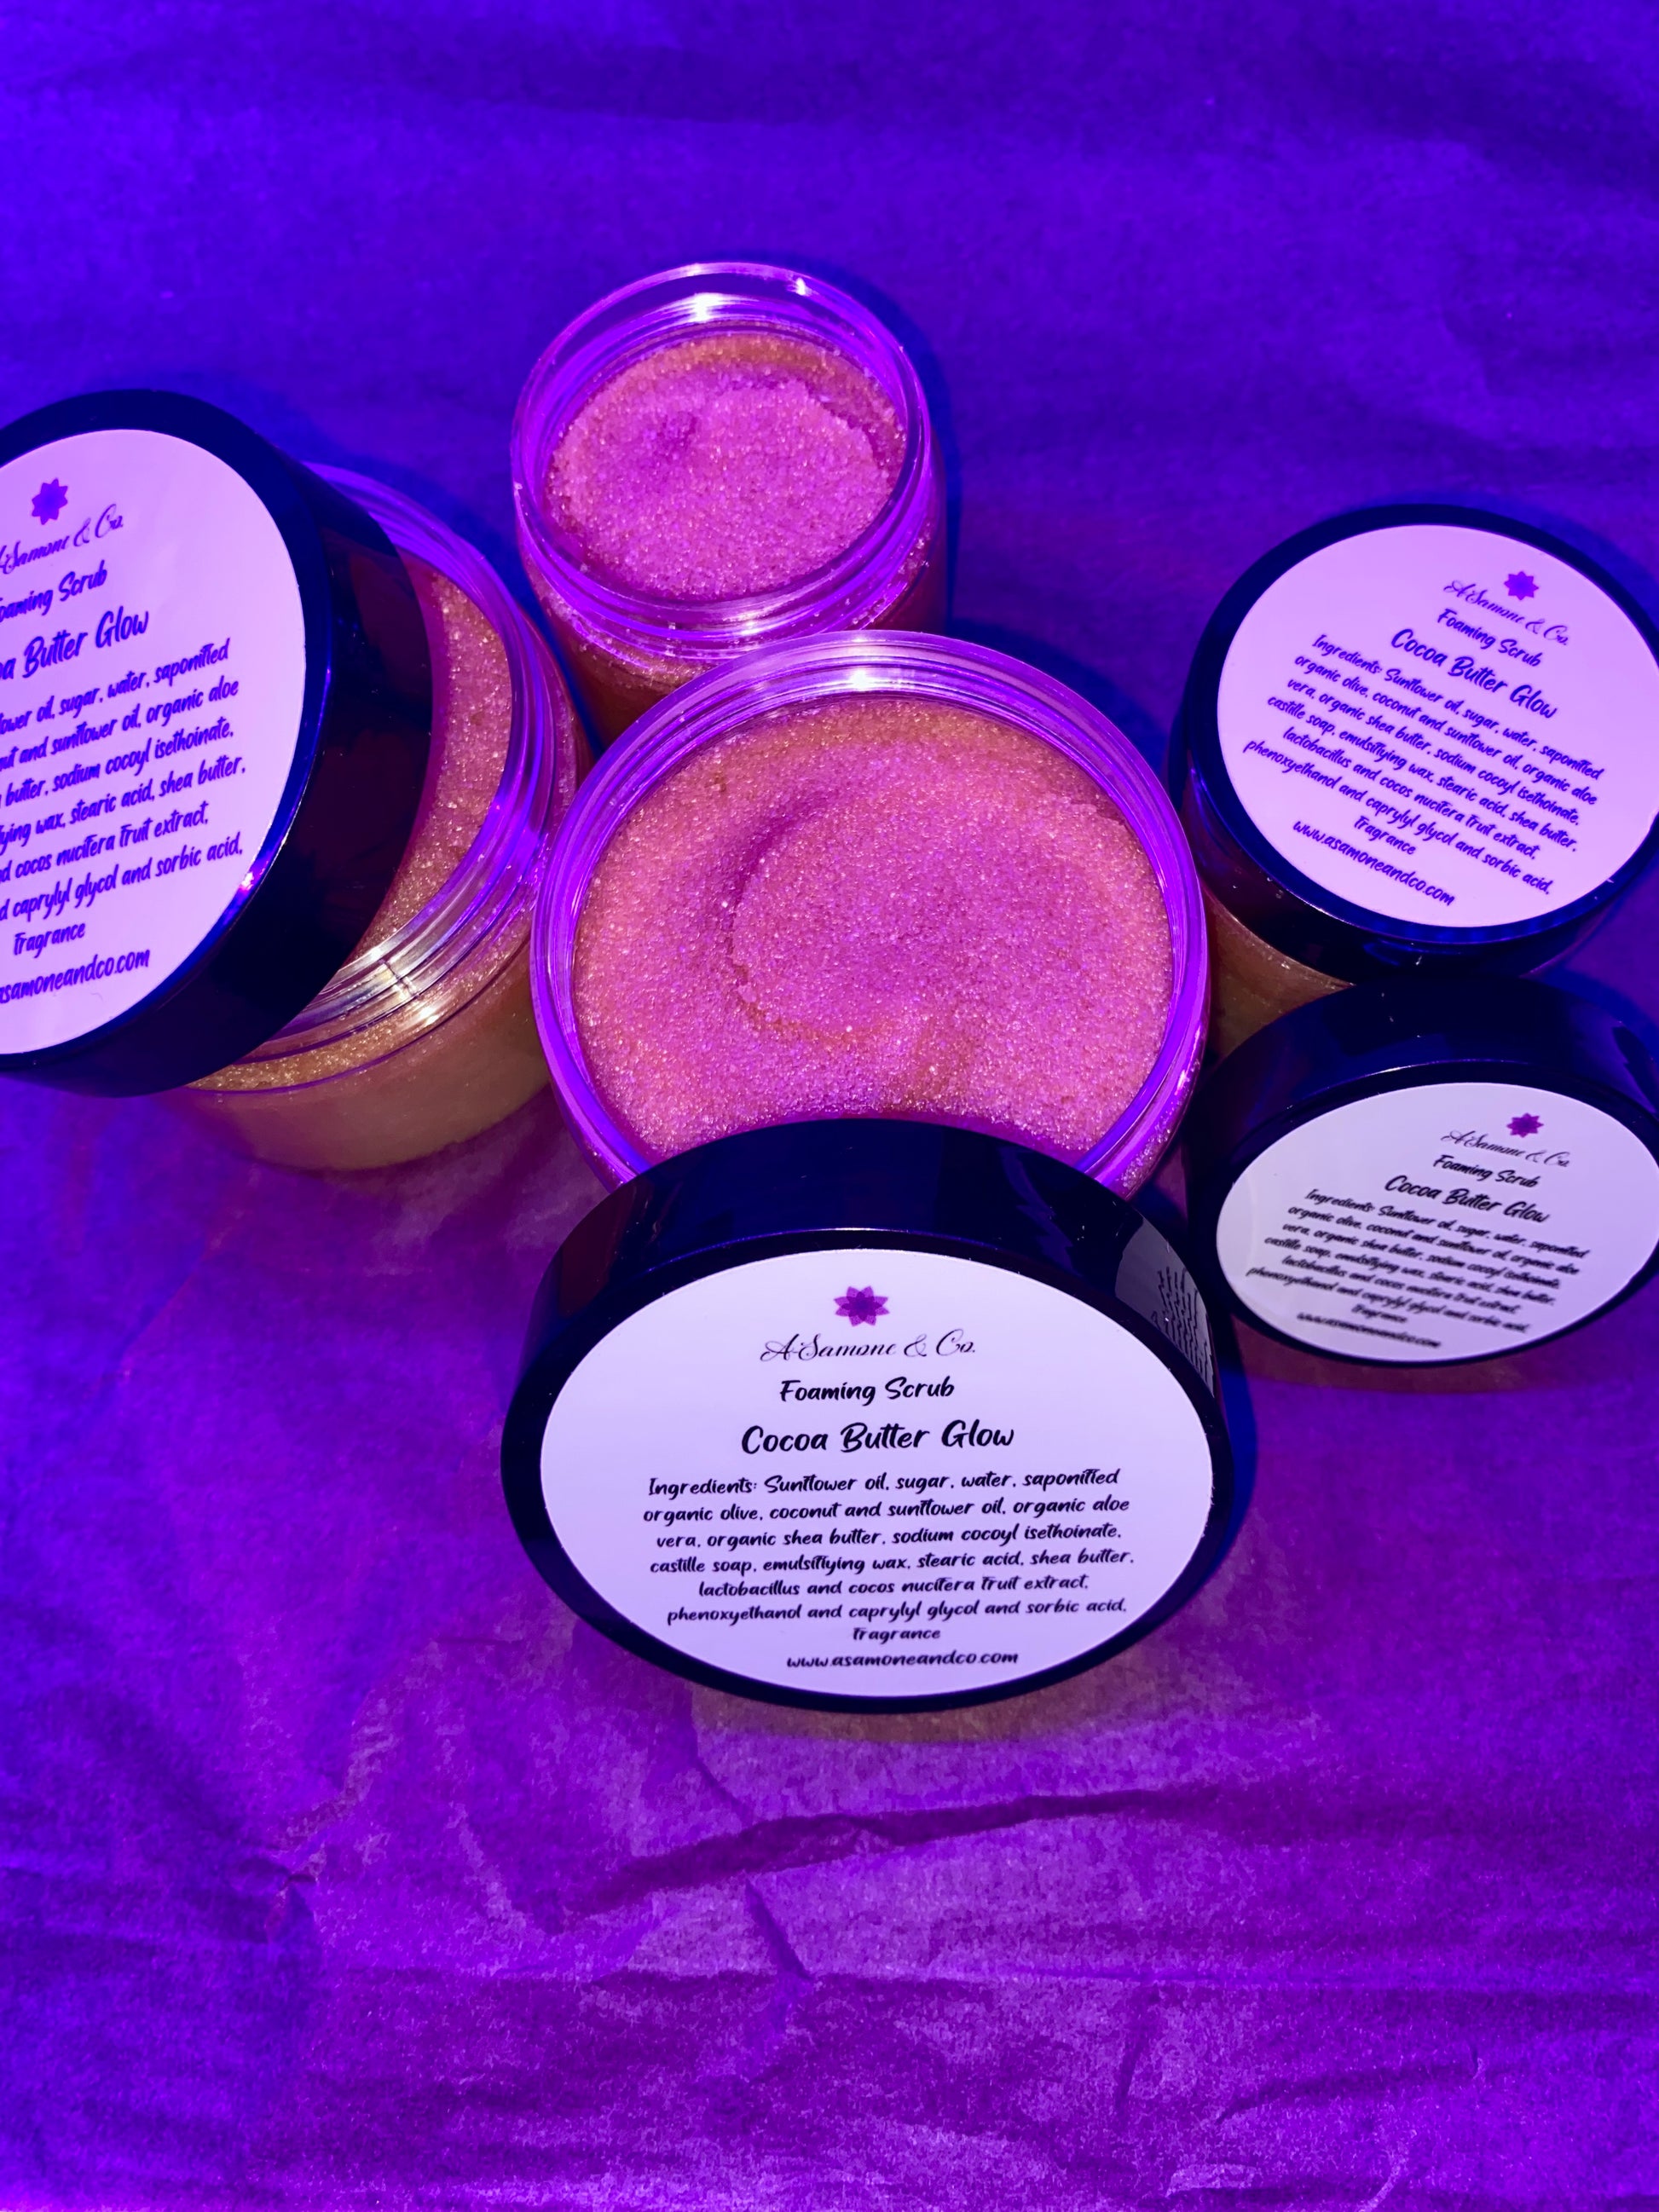 Cocoa Butter Glow Body Scrub 2 and 4oz seen in picture